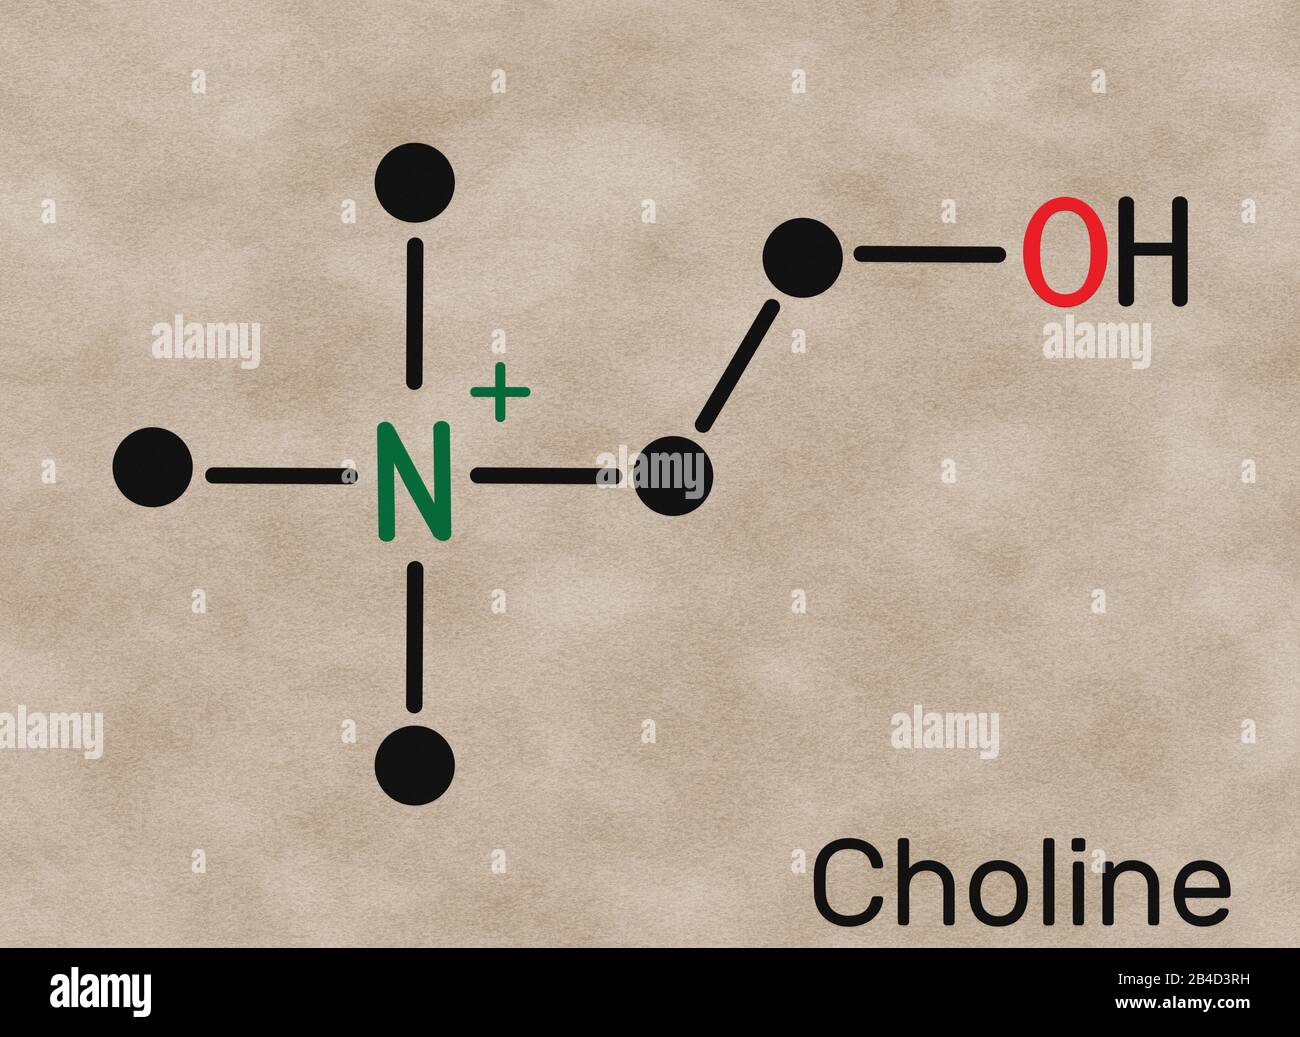 Choline,  C5H14NO+ , vitamin-like essential nutrien molecule. It is a constituent of lecithin. Skeletal chemical formula. Illustration Stock Photo